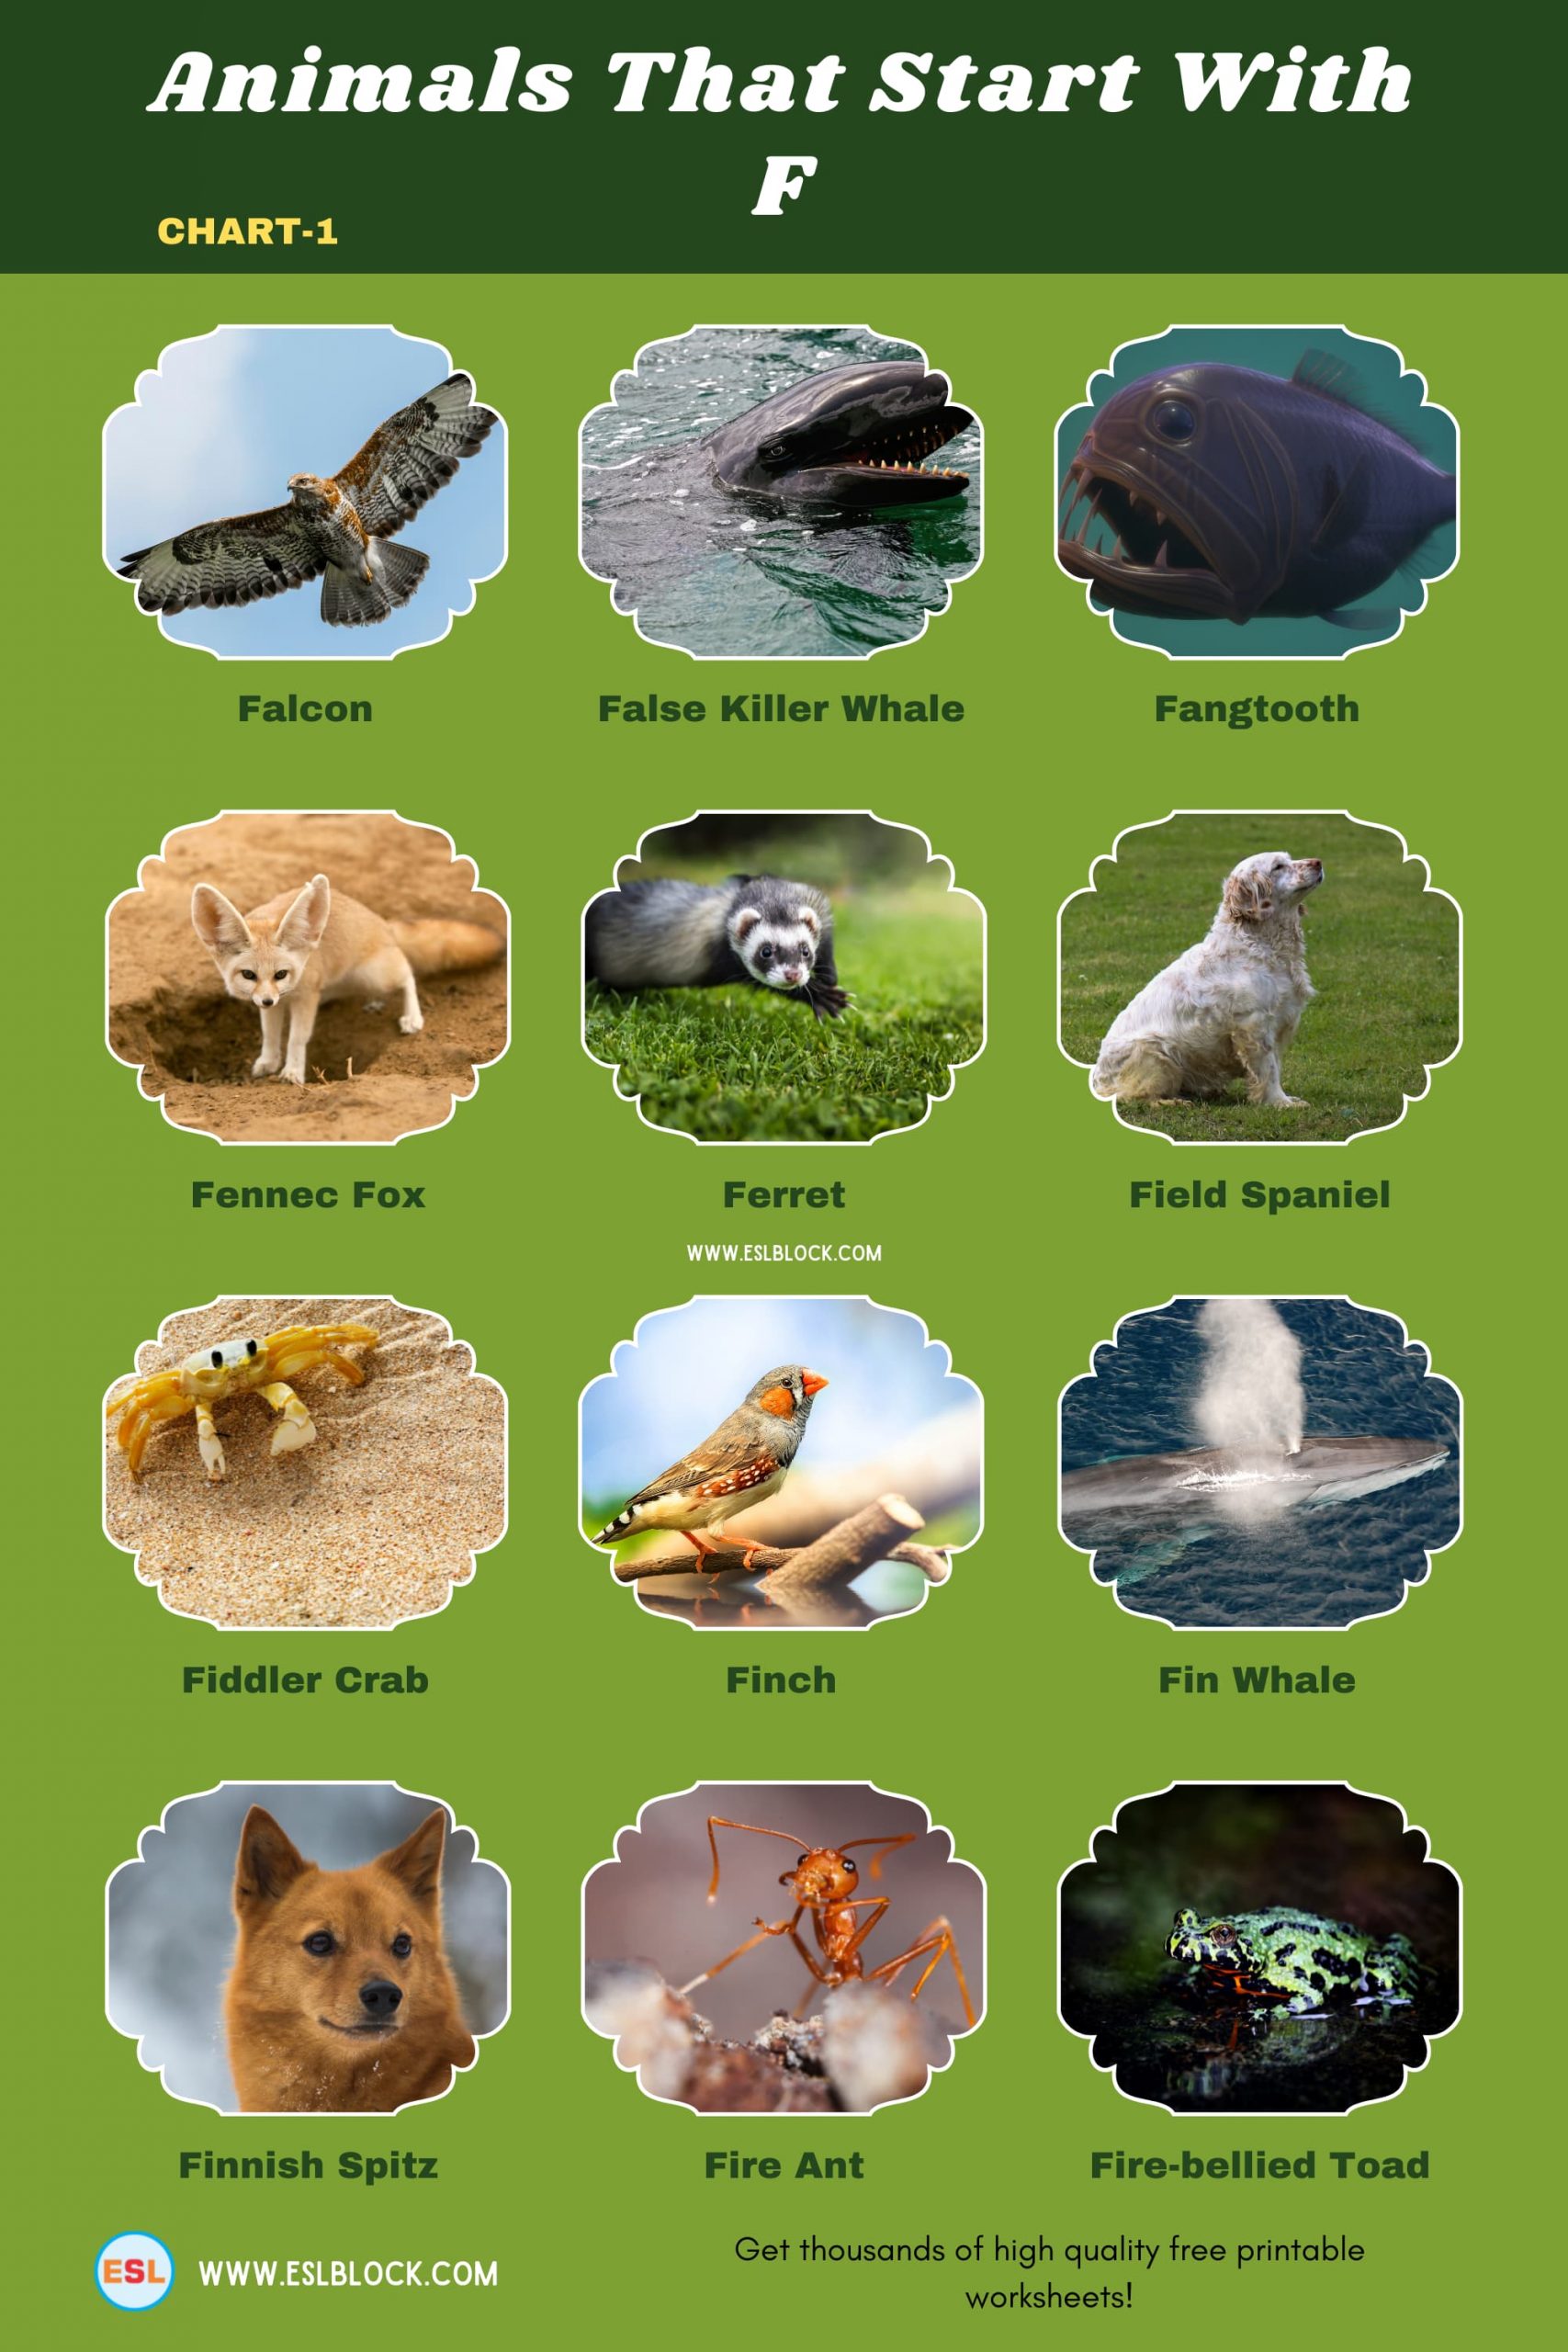 5 Letter Animals Starting With F, Animals List, Animals Names, Animals That Begins With F, Animals That Start With F, English, English Nouns, English Vocabulary, English Words, F Animals, F Animals in English, F Animals Names, List of Animals That Start With F, Nouns, Vocabulary